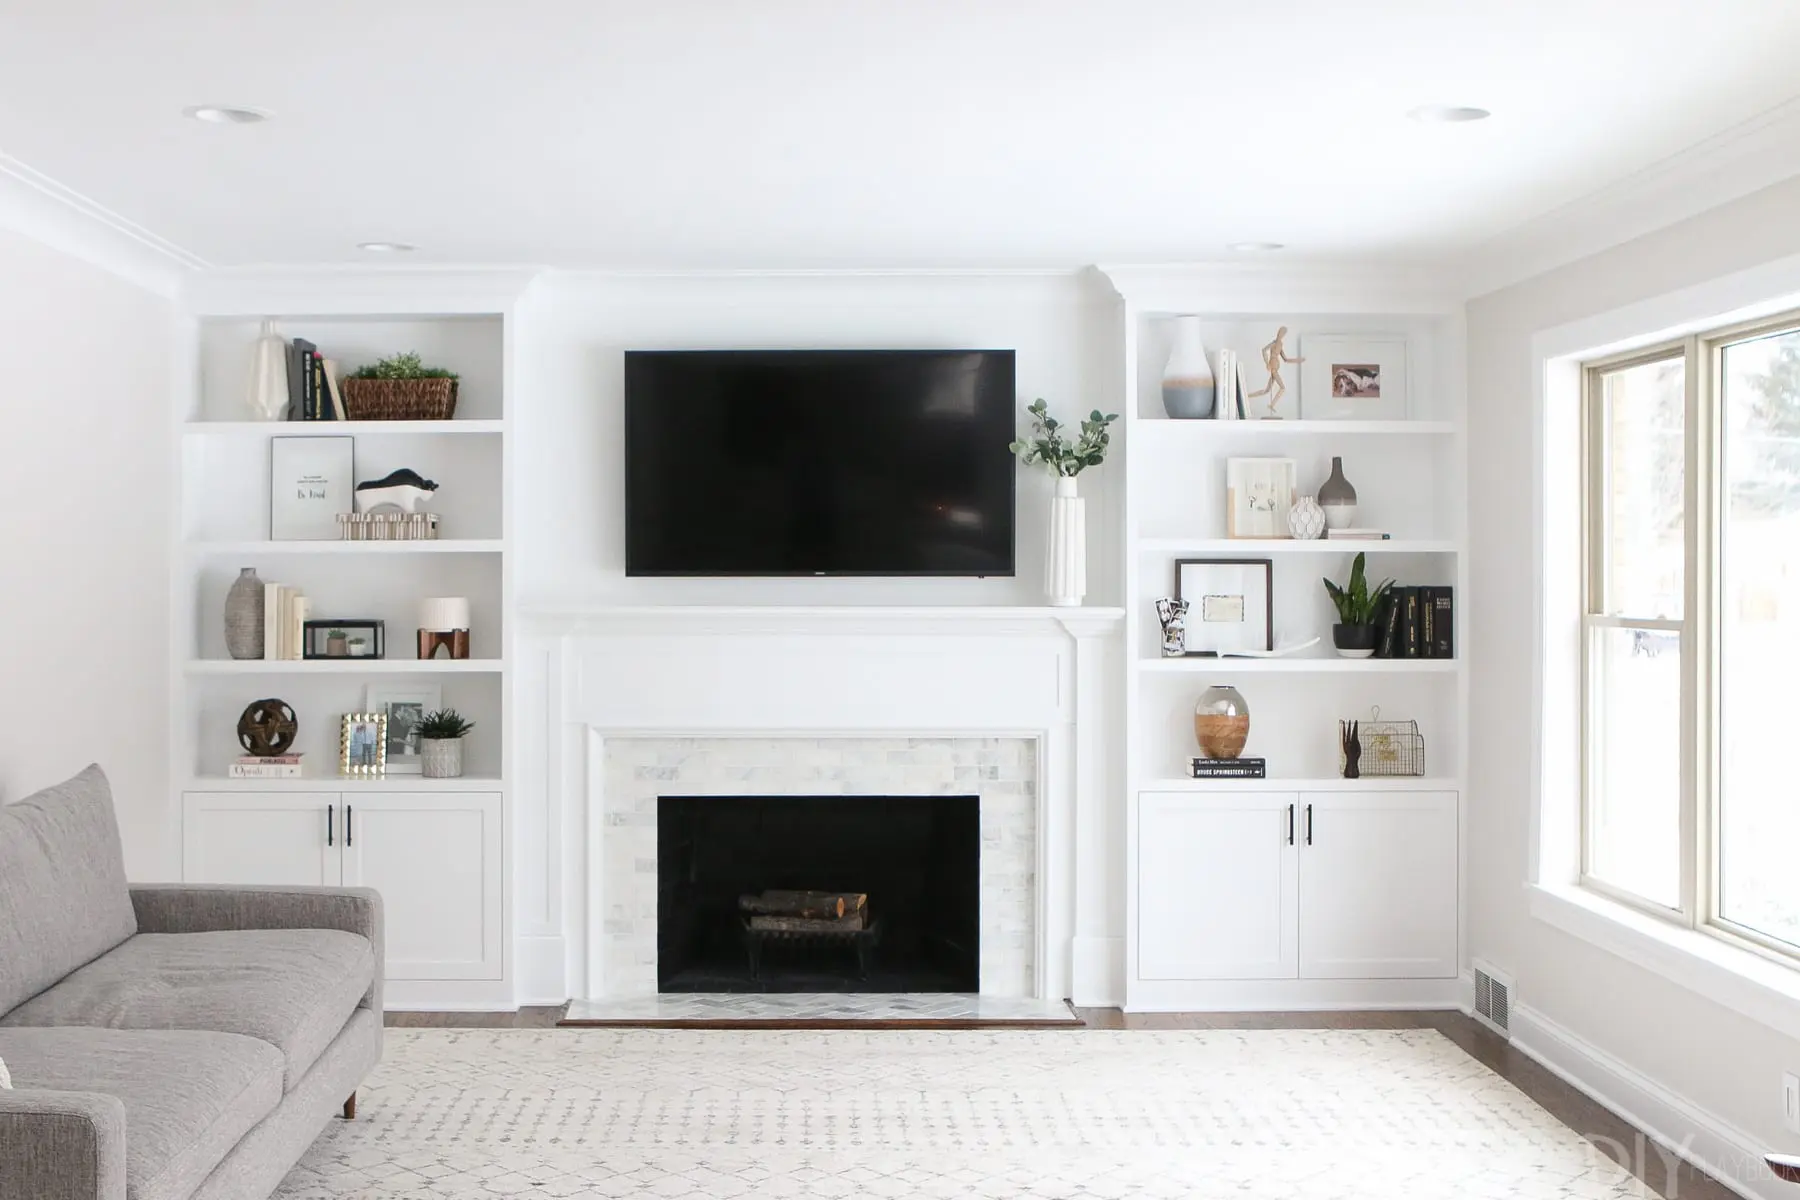 Decorating Built In Shelves, Fireplace With Bookcases Design Ideas